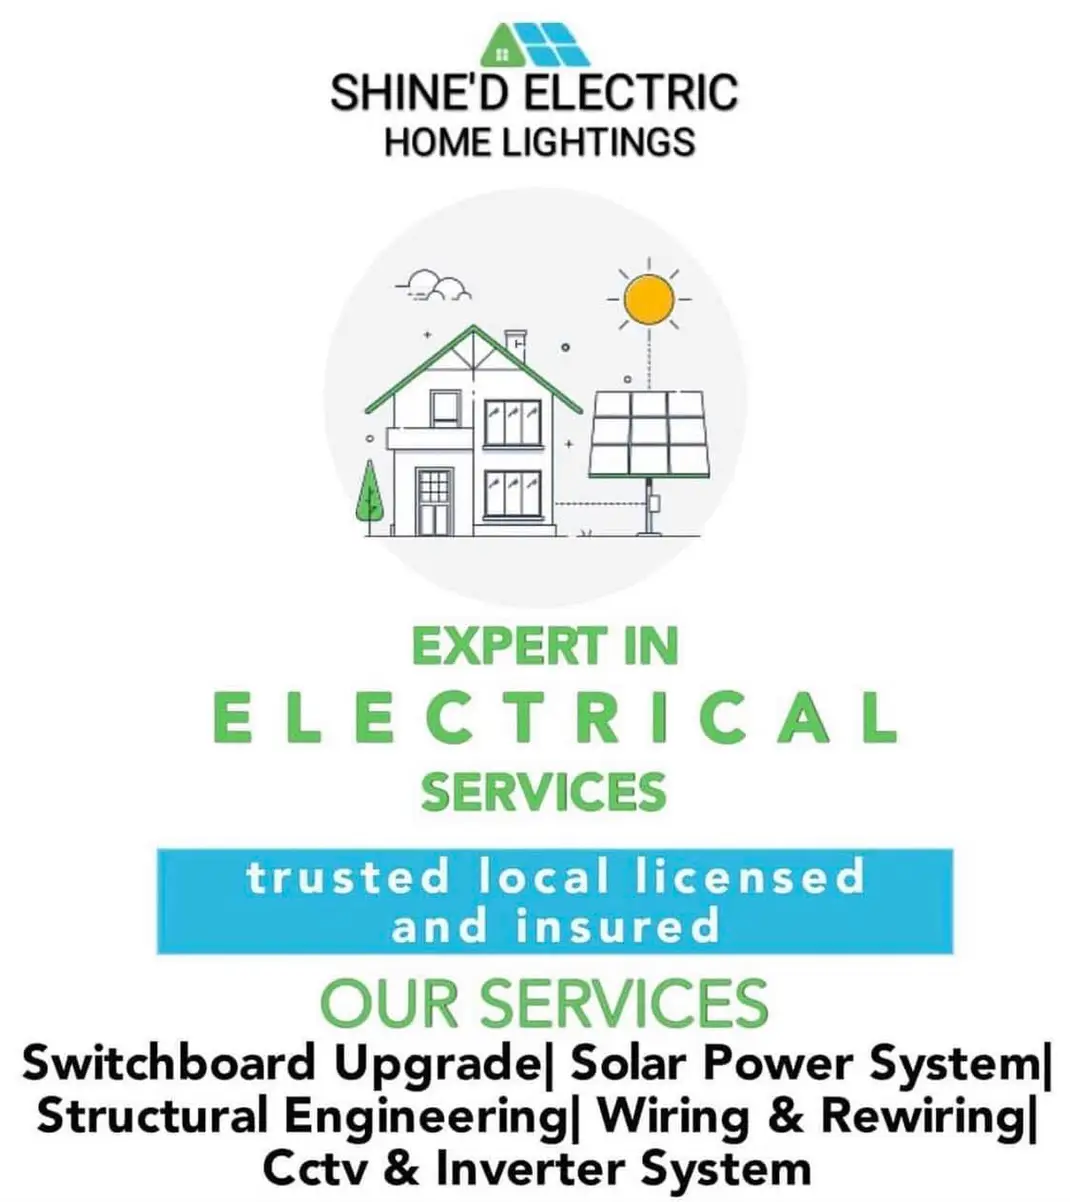 An
SHINE'D ELECTRIC
HOME LIGHTINGS

 

EXPERT IN

ELECTRICAL
SERVICES

and insured
OUR SERVICES

Switchboard Upgrade| Solar Power System|
Structural Engineering| Wiring & Rewiring|
Cctv & Inverter System